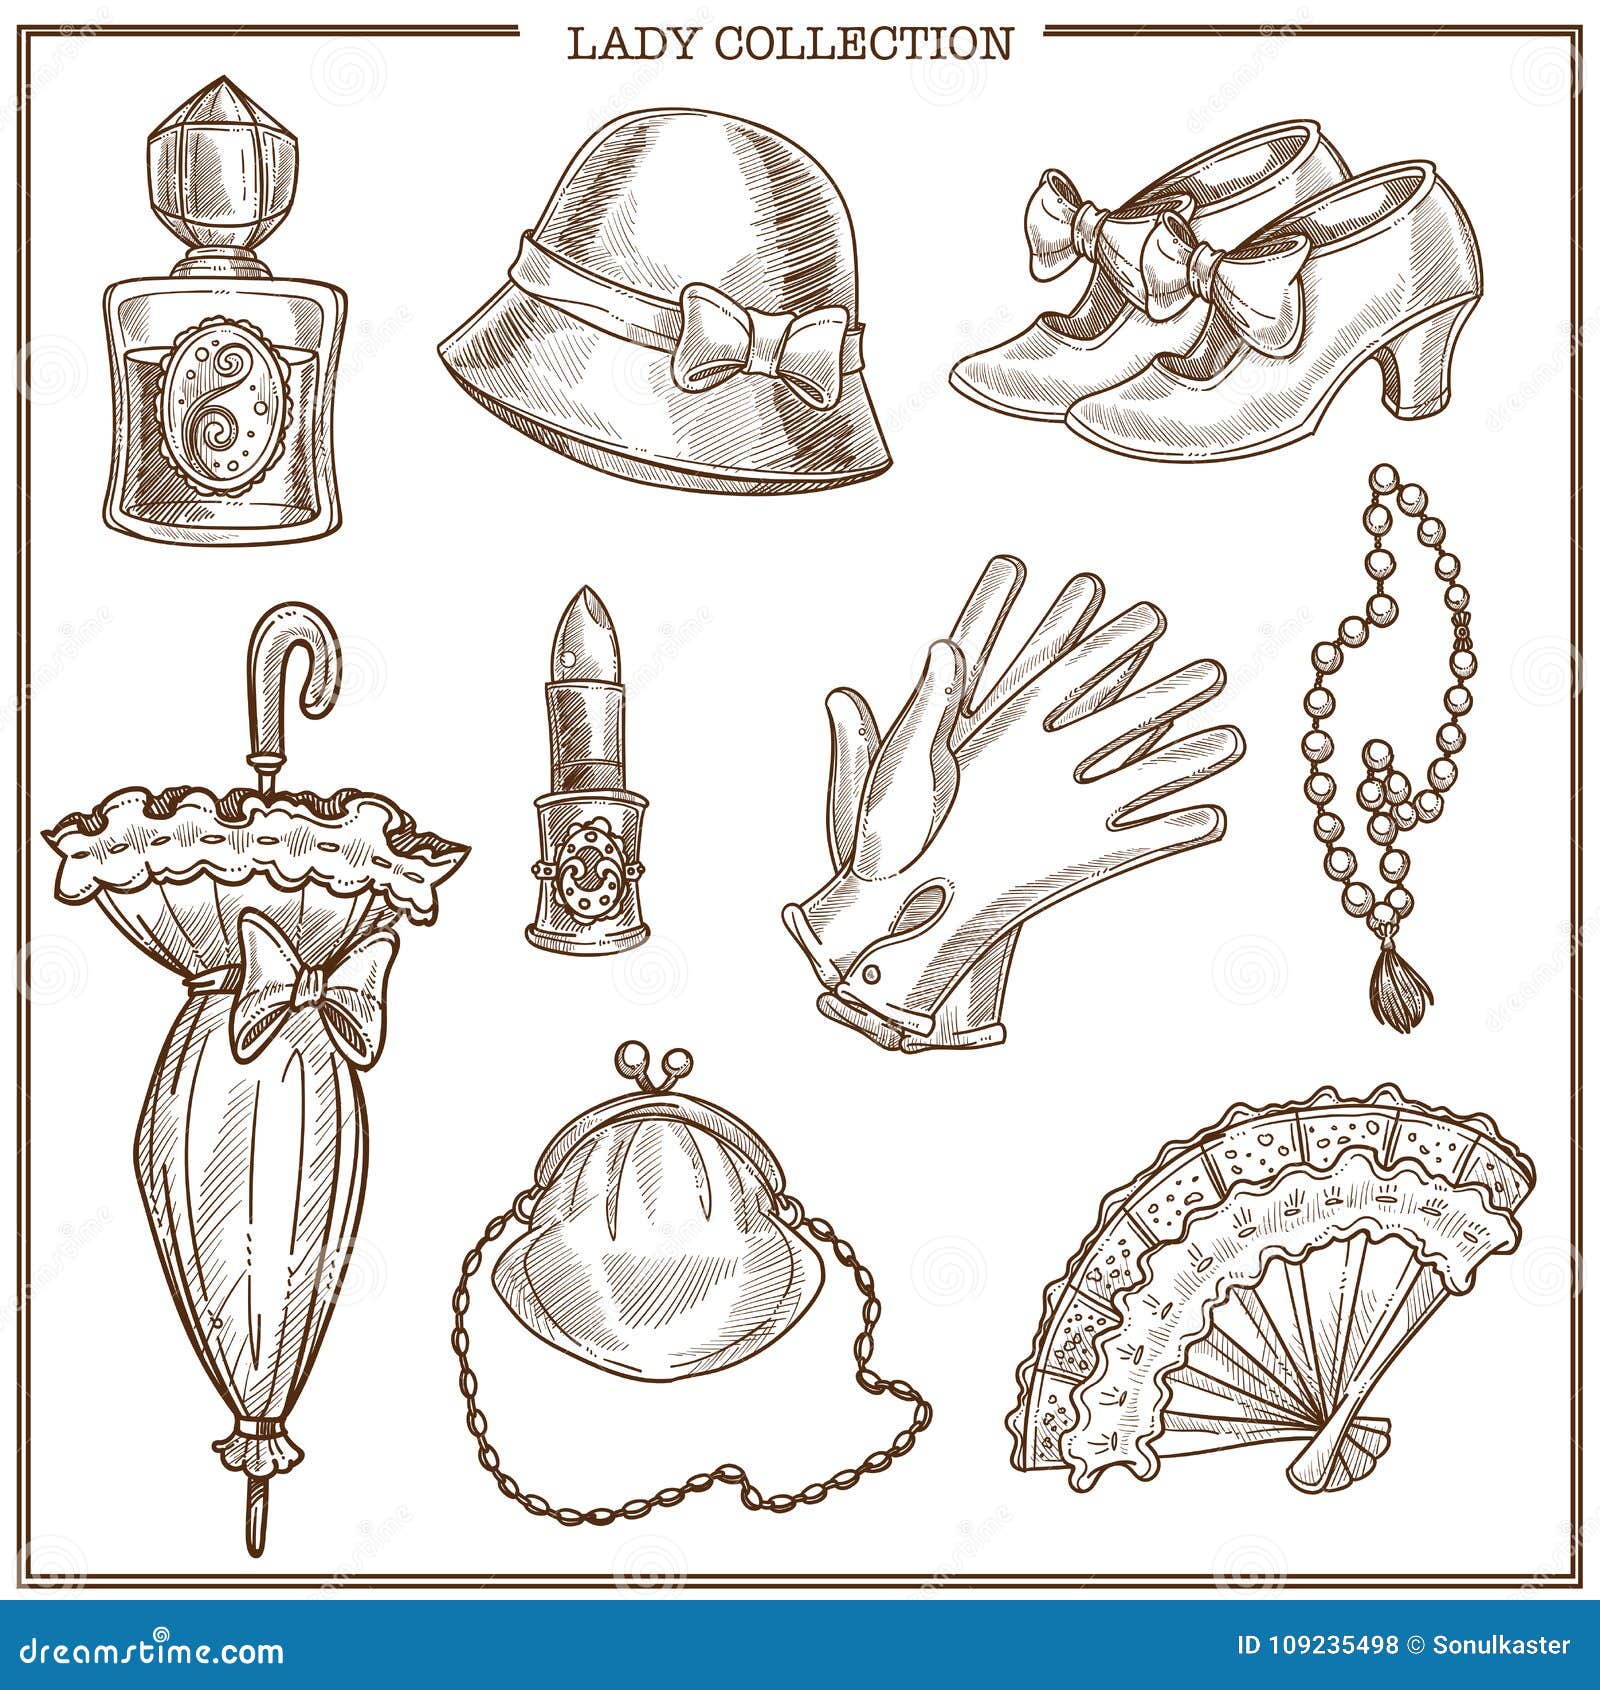 Lady Retro Clothes and Woman Vintage Fashion Accessories Vector Sketch Icons Stock - of glove, 109235498